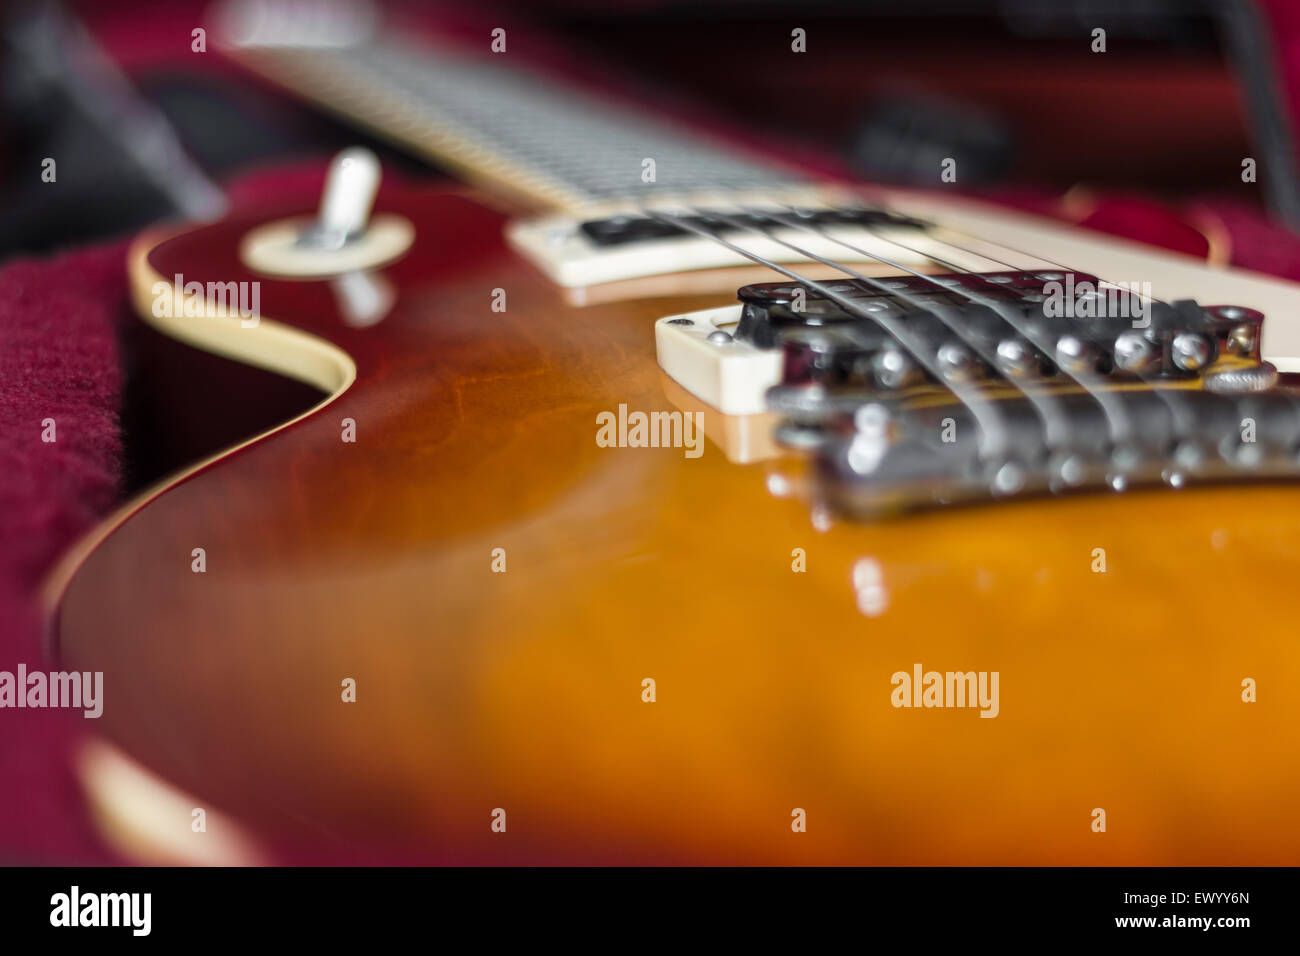 Extreme close-up of an electric guitar in its carry case. Stock Photo